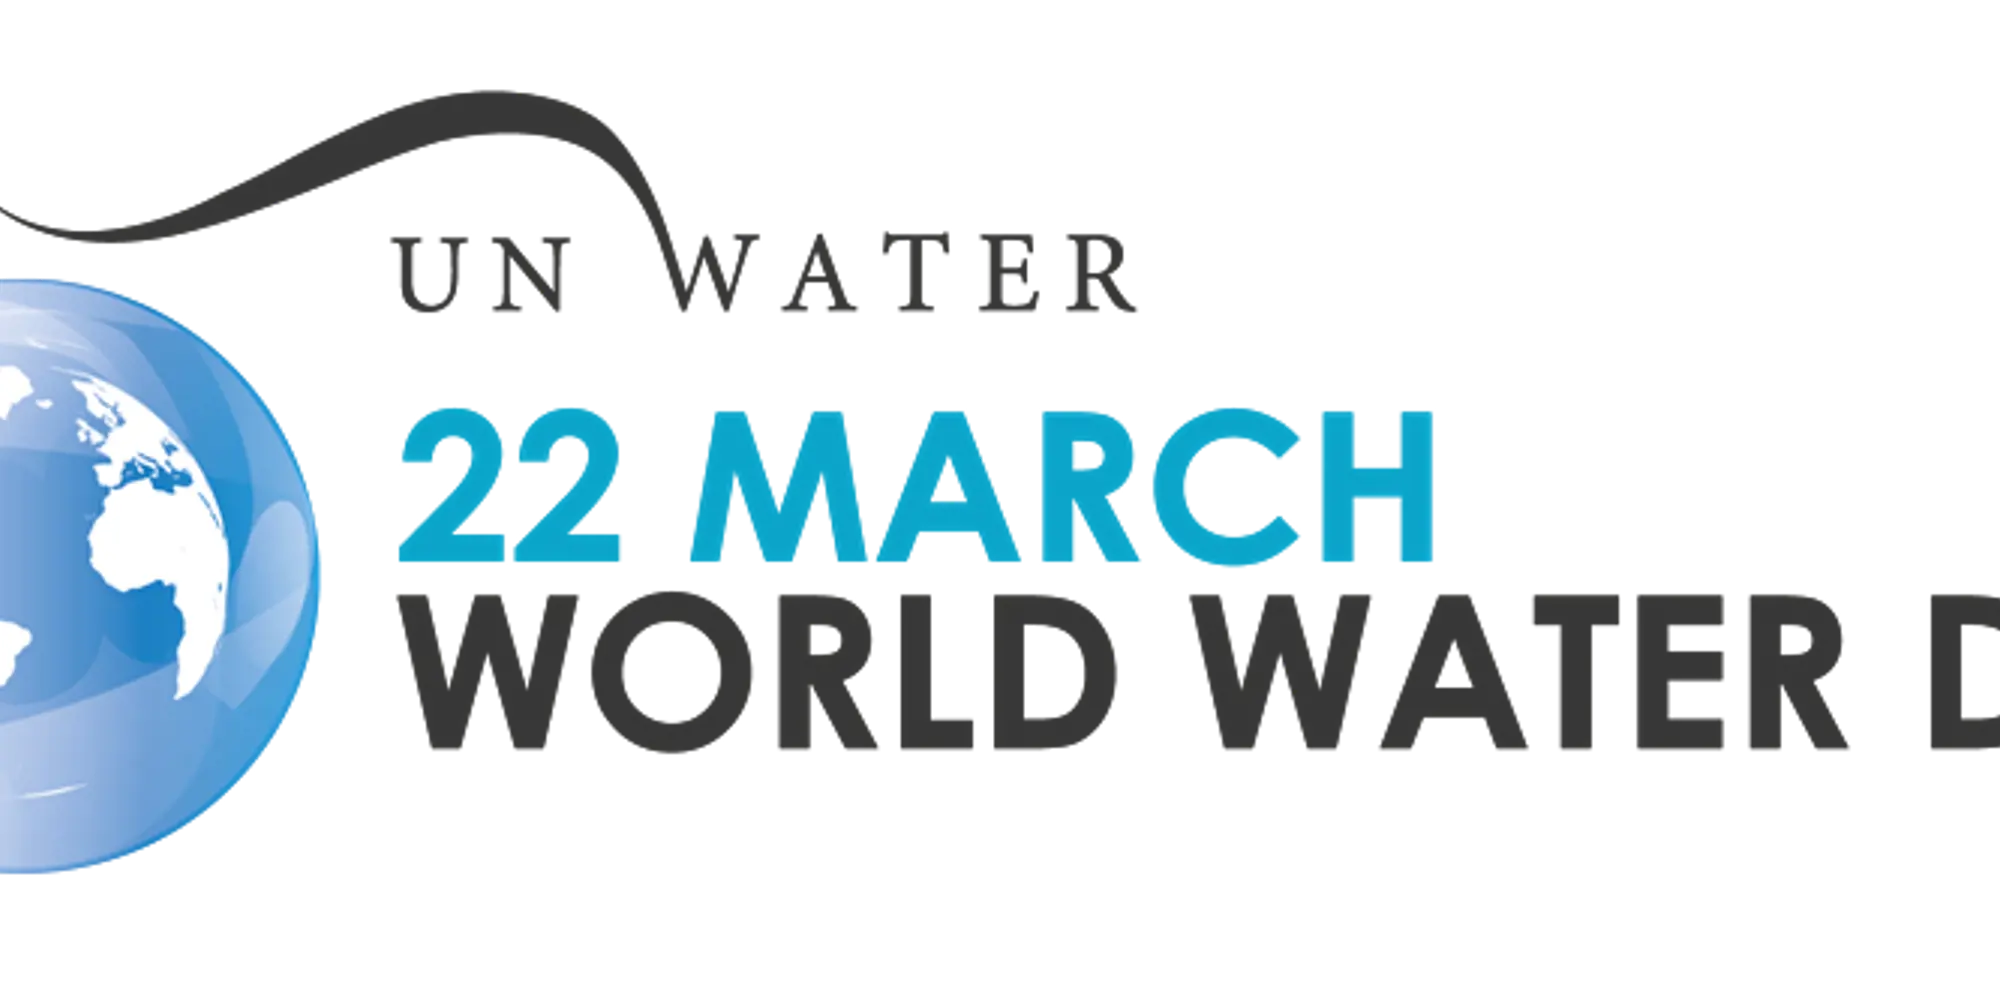 2022 Vision: World Water Day